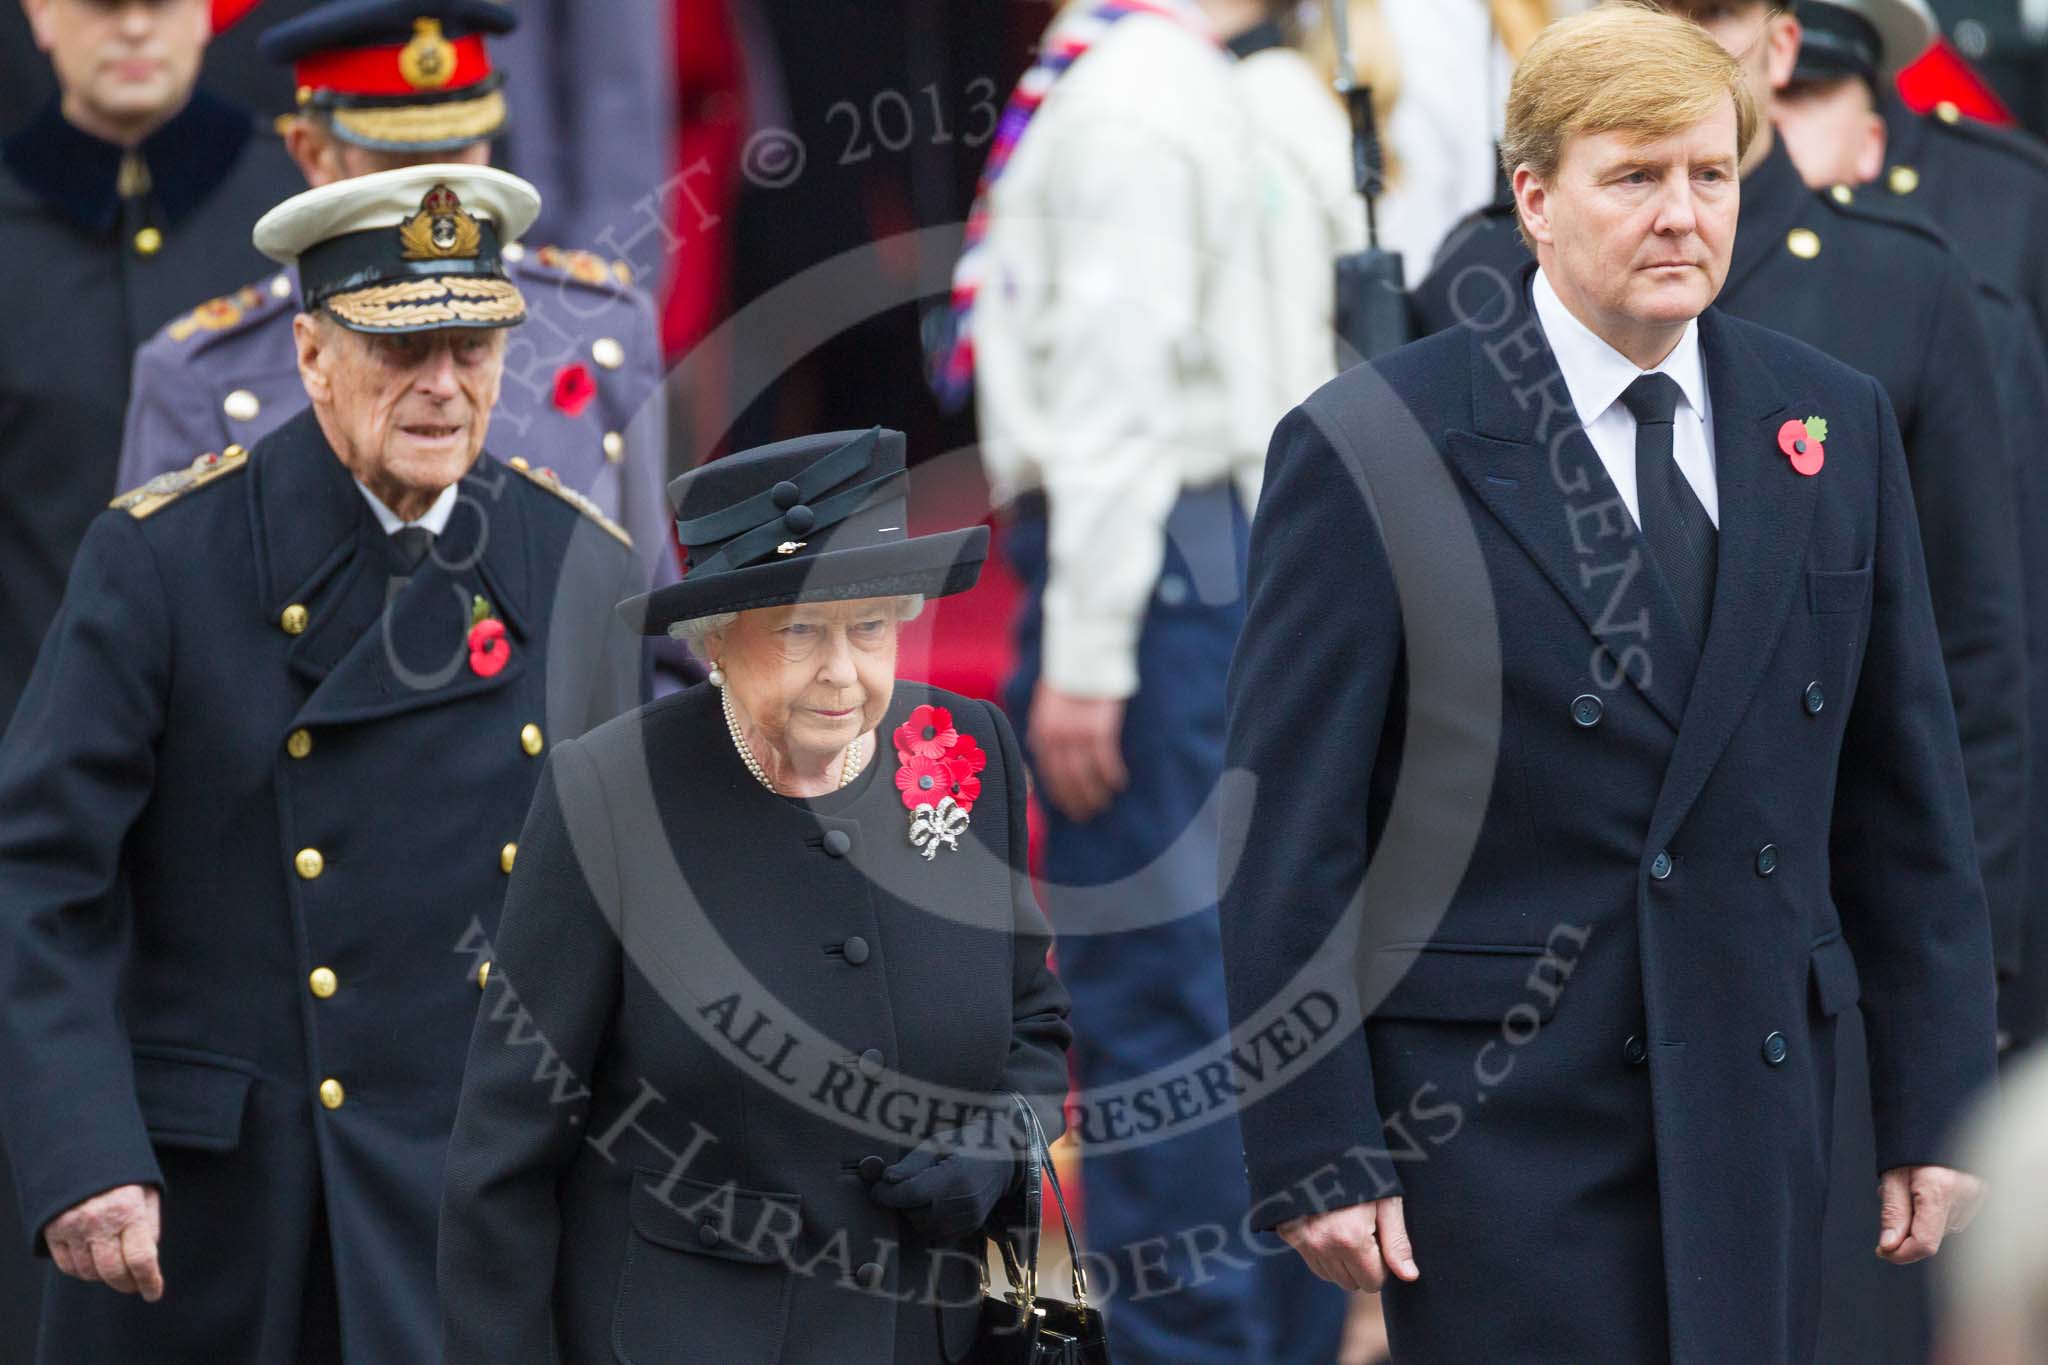 Remembrance Sunday at the Cenotaph 2015: HM King Willem-Alexander of the Netherlands, followed by the other members of the British Royal Family, walking past the Cenotaph. Image #130, 08 November 2015 10:58 Whitehall, London, UK